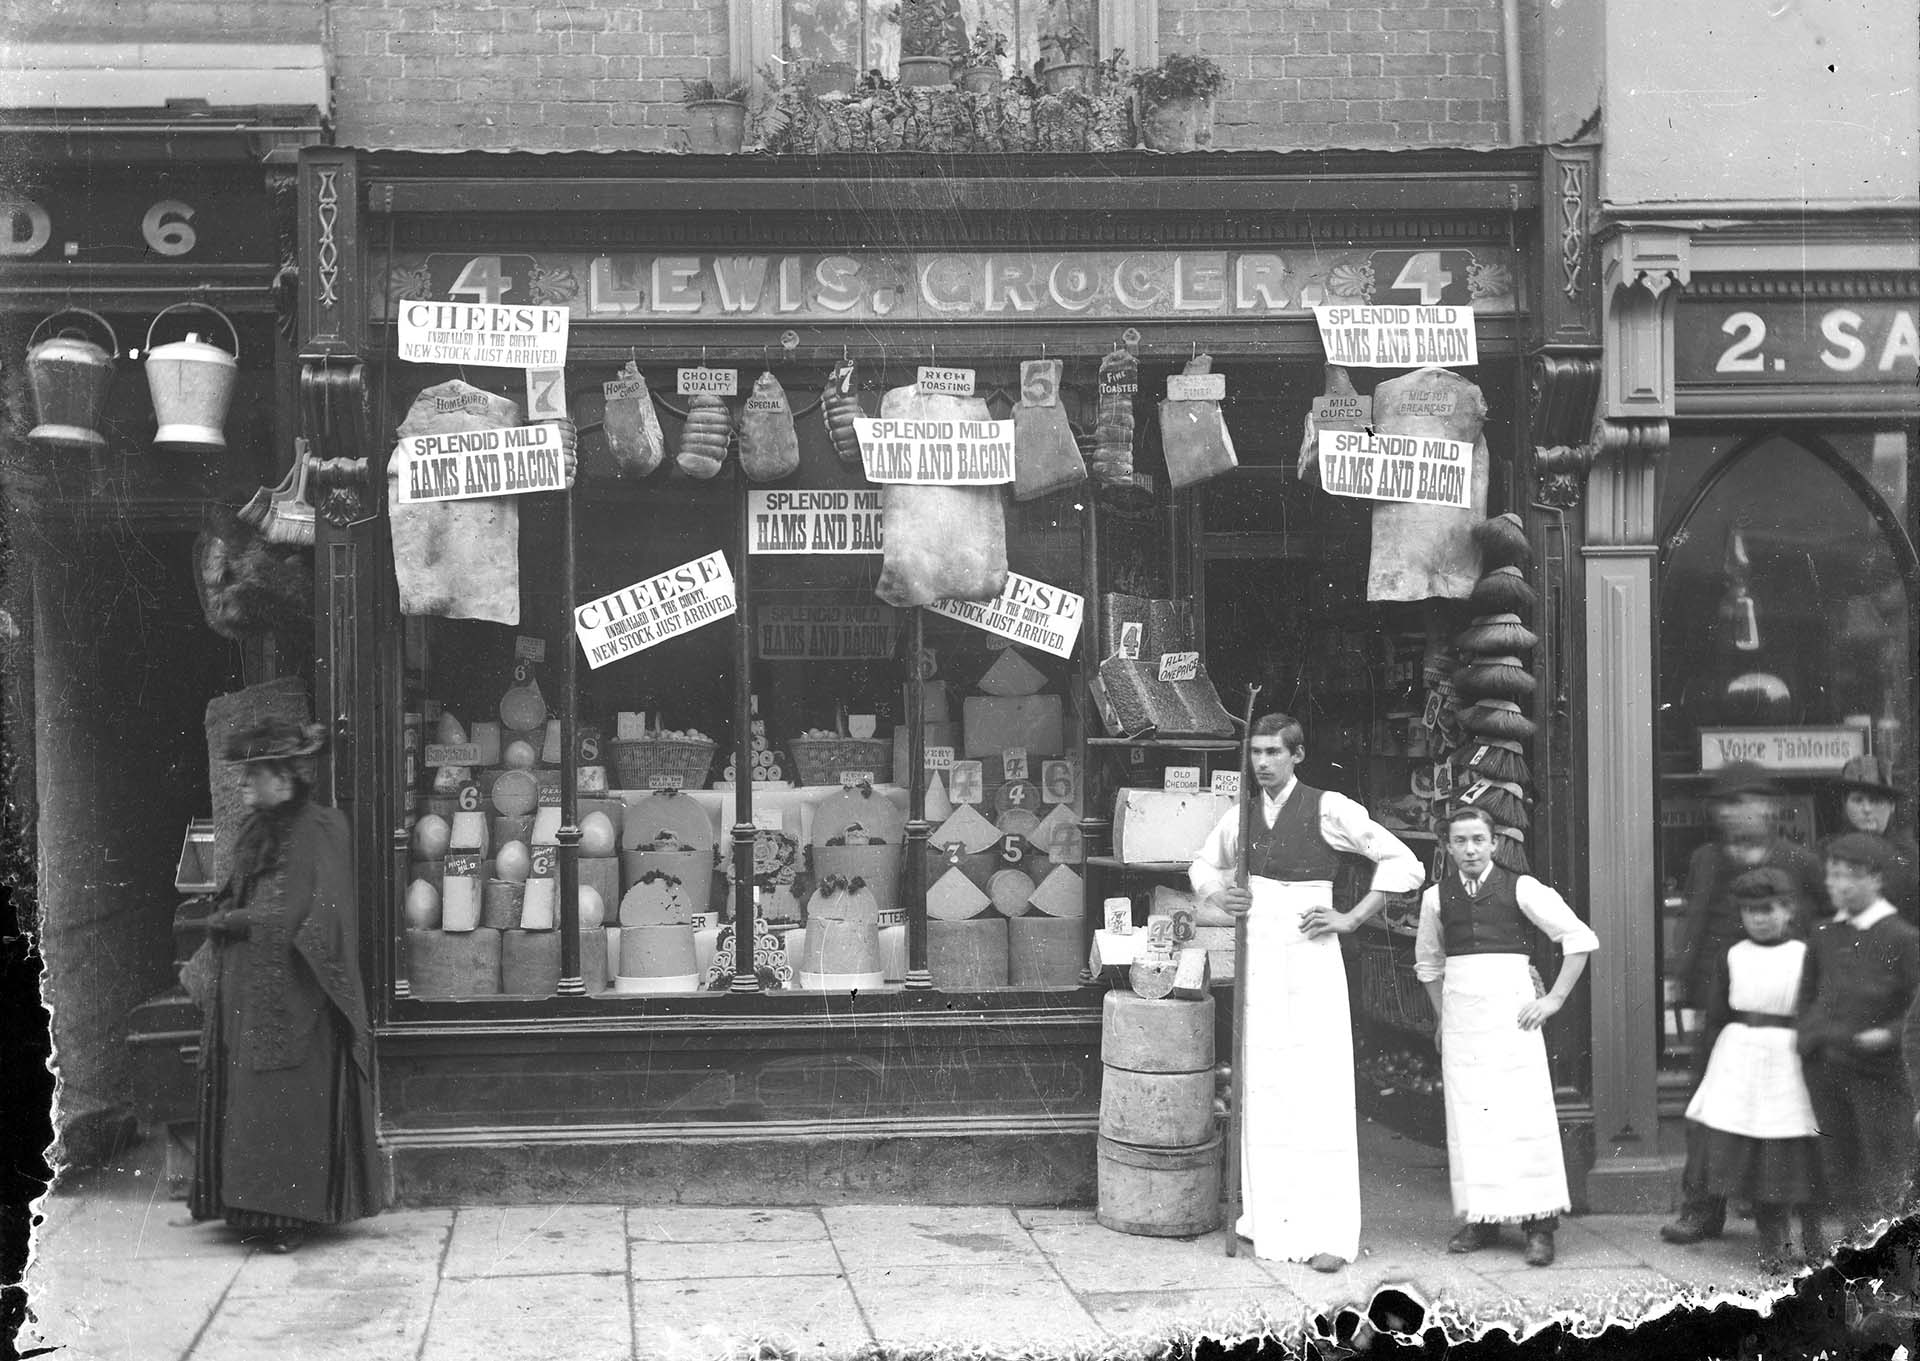 Shop front of Lewis Grocers